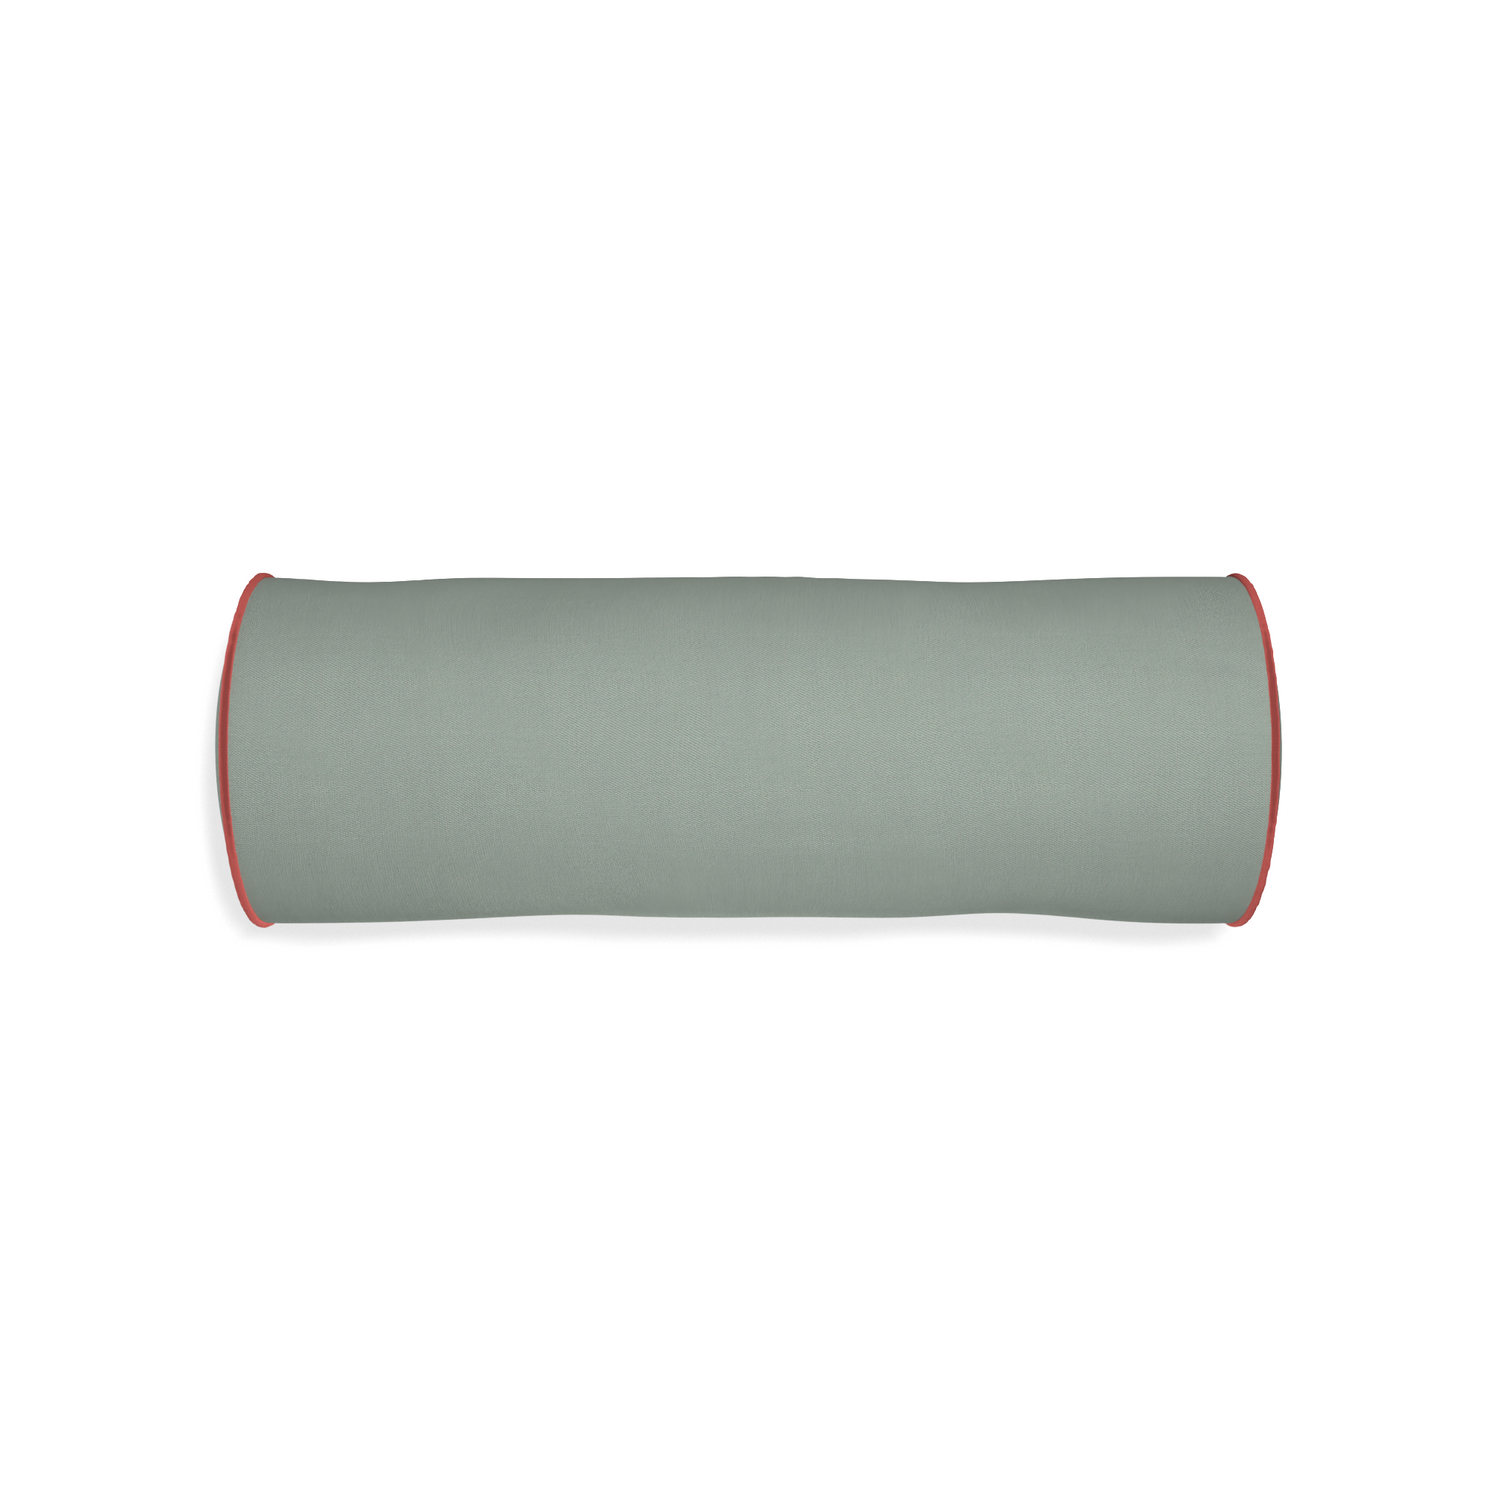 Bolster sage custom sage green cottonpillow with c piping on white background